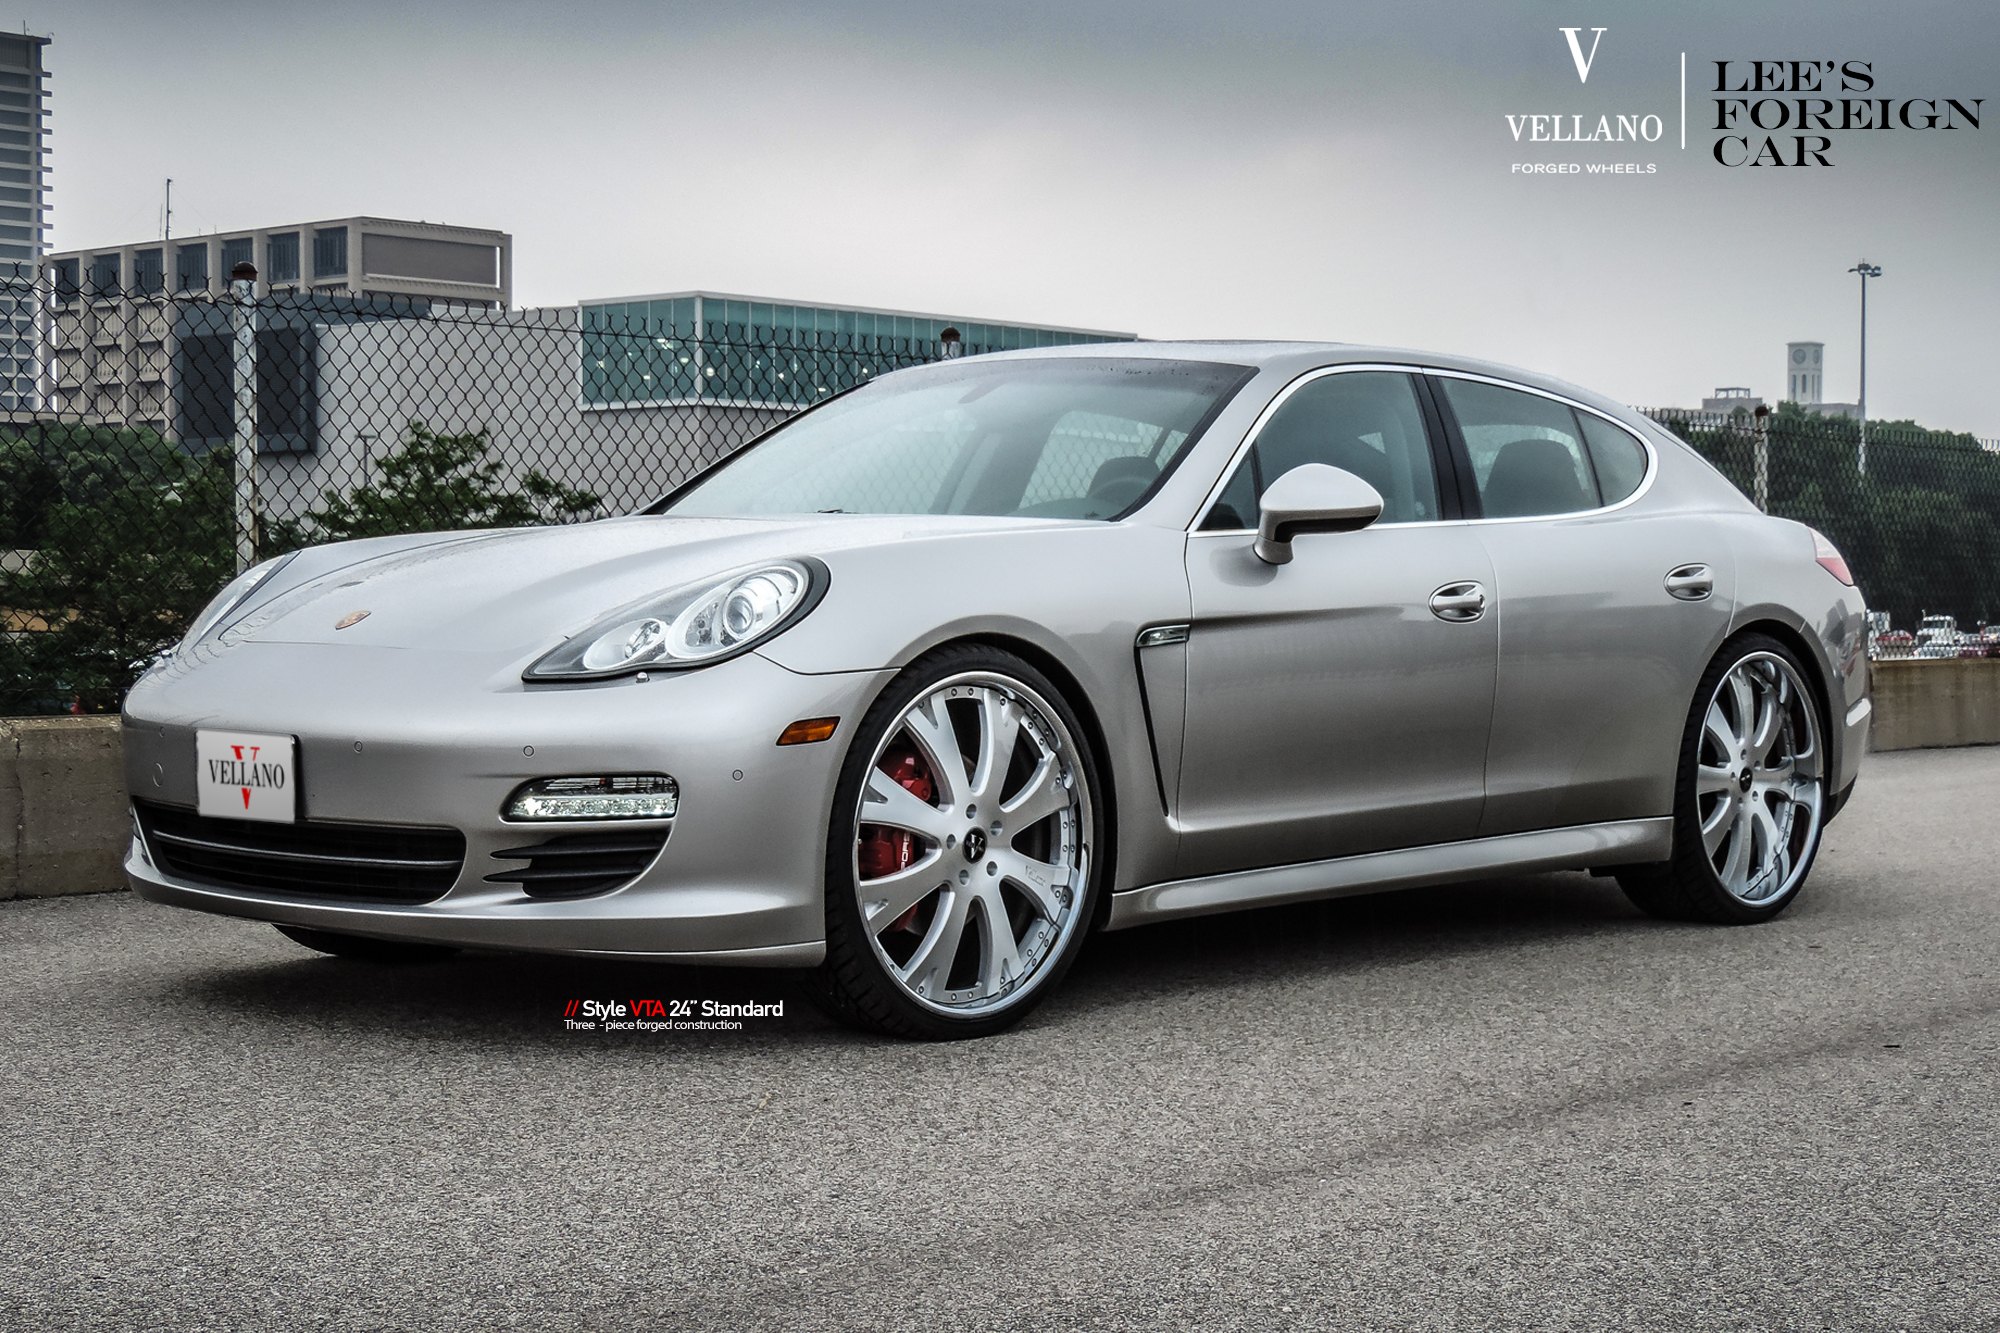 Front Bumper with LED Lights on Porsche Panamera - Photo by Vellano